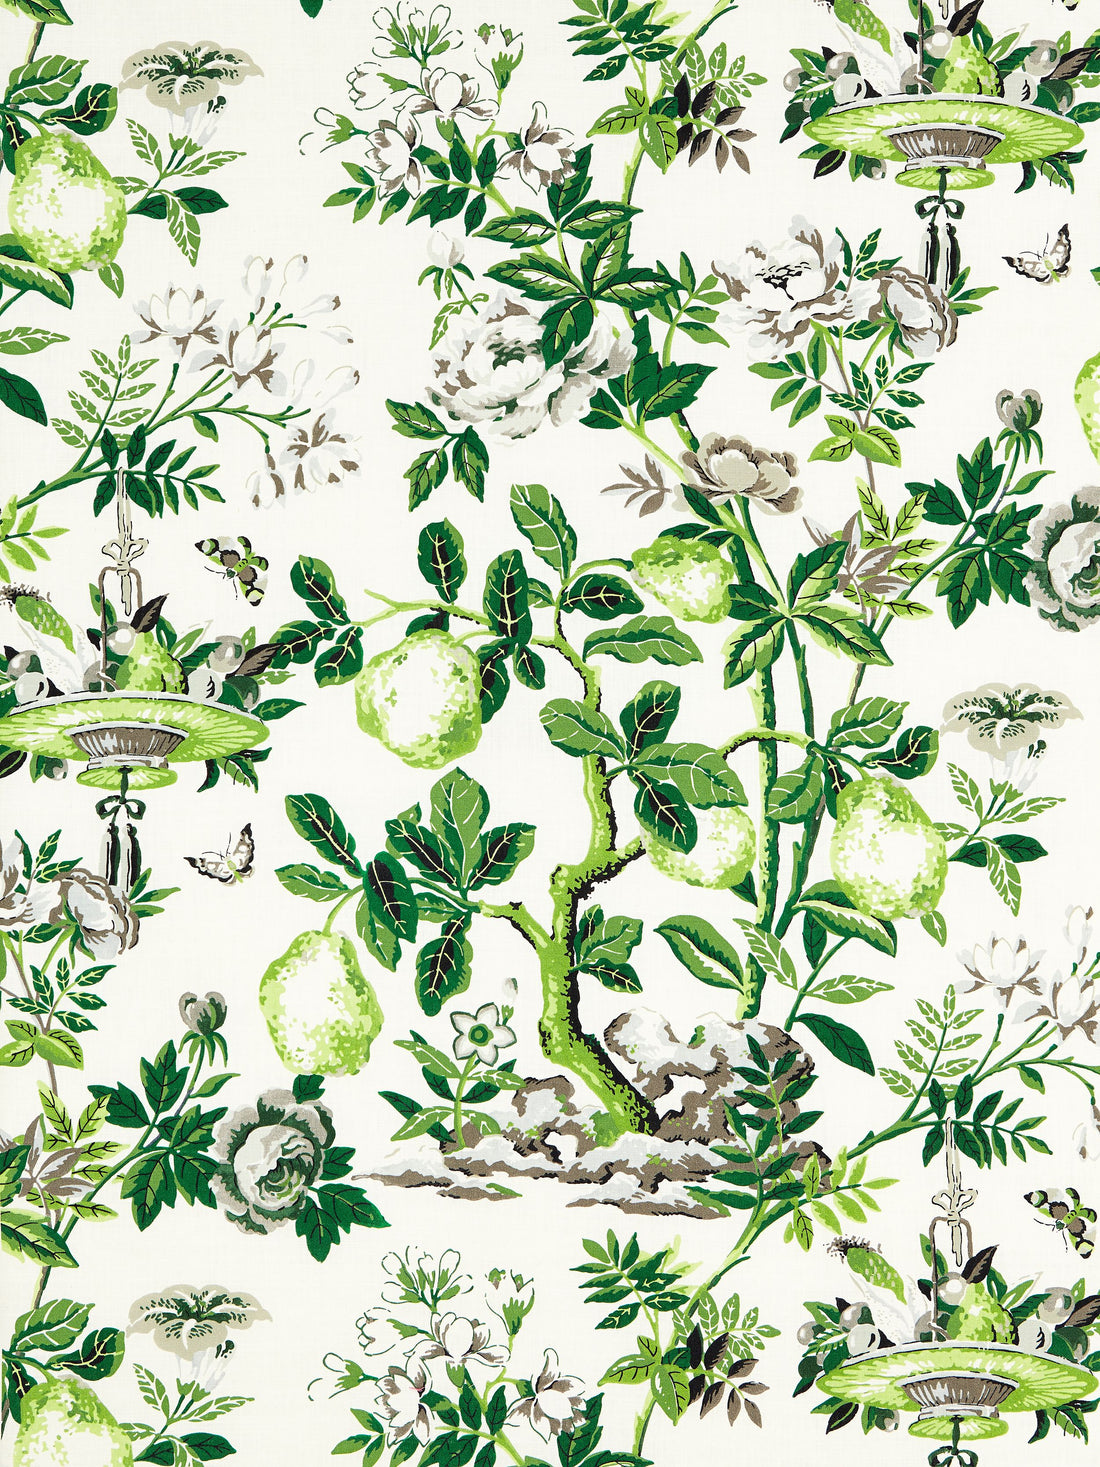 Shantung Garden Cotton Print fabric in verdance color - pattern number SC 000316583 - by Scalamandre in the Scalamandre Fabrics Book 1 collection